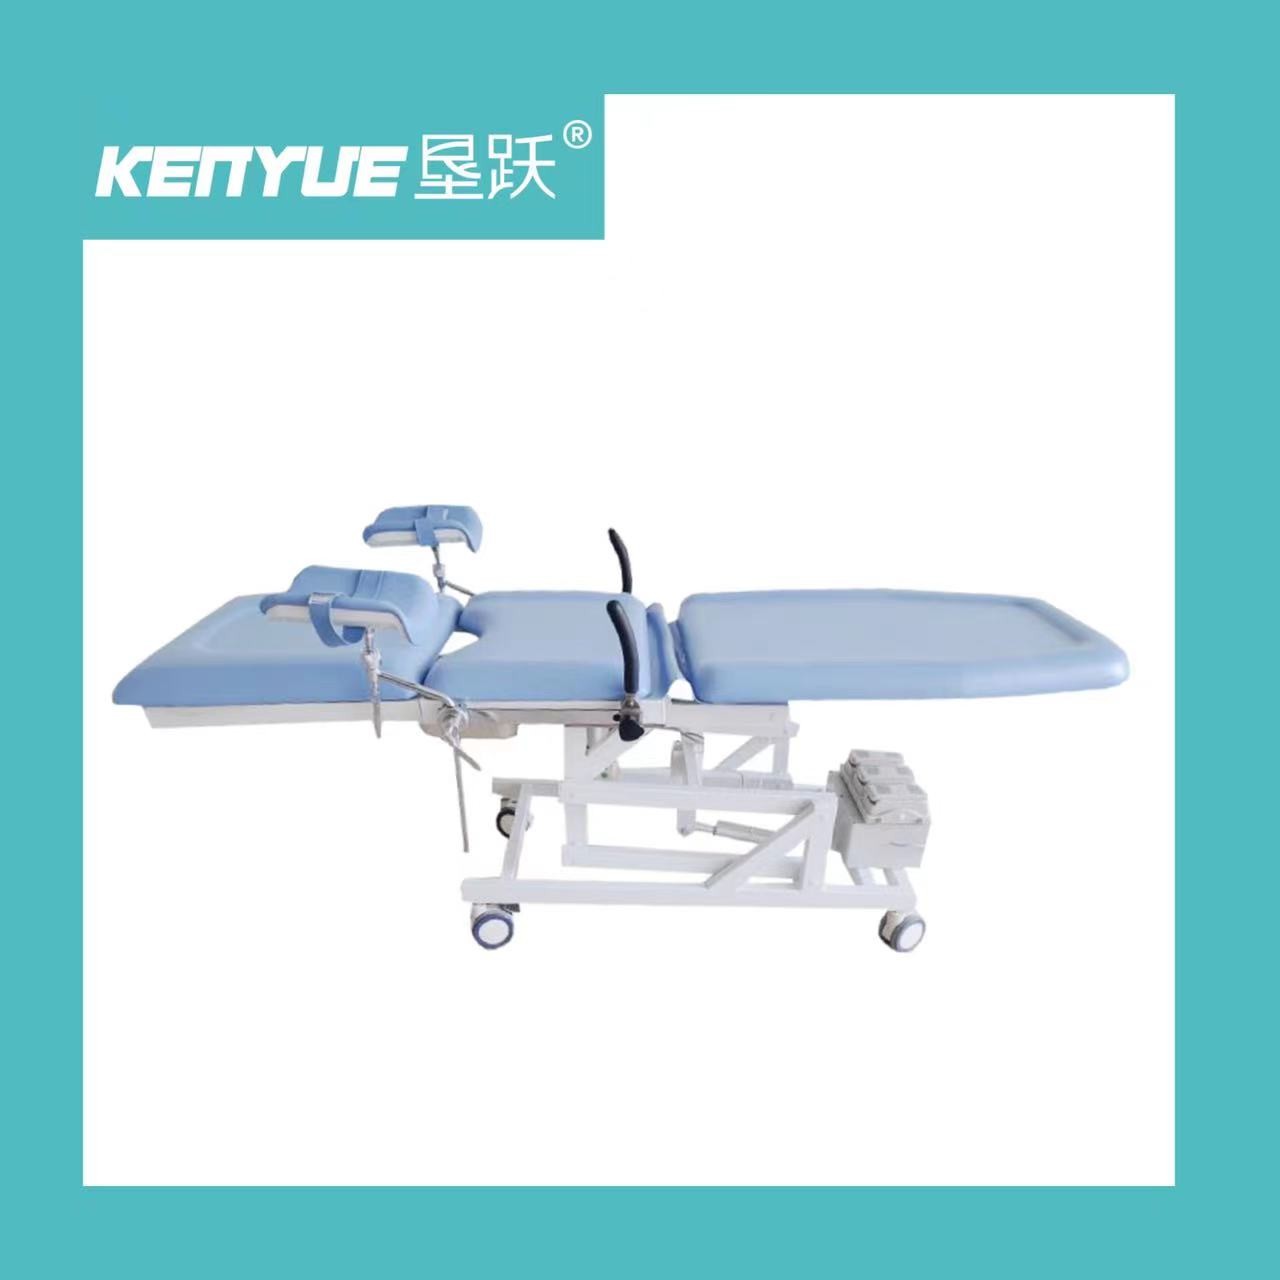  Bule Color Electric 3 Fcuntion Delivery Bed 90cm Metal Multifunction Gynecological Table Manufactures